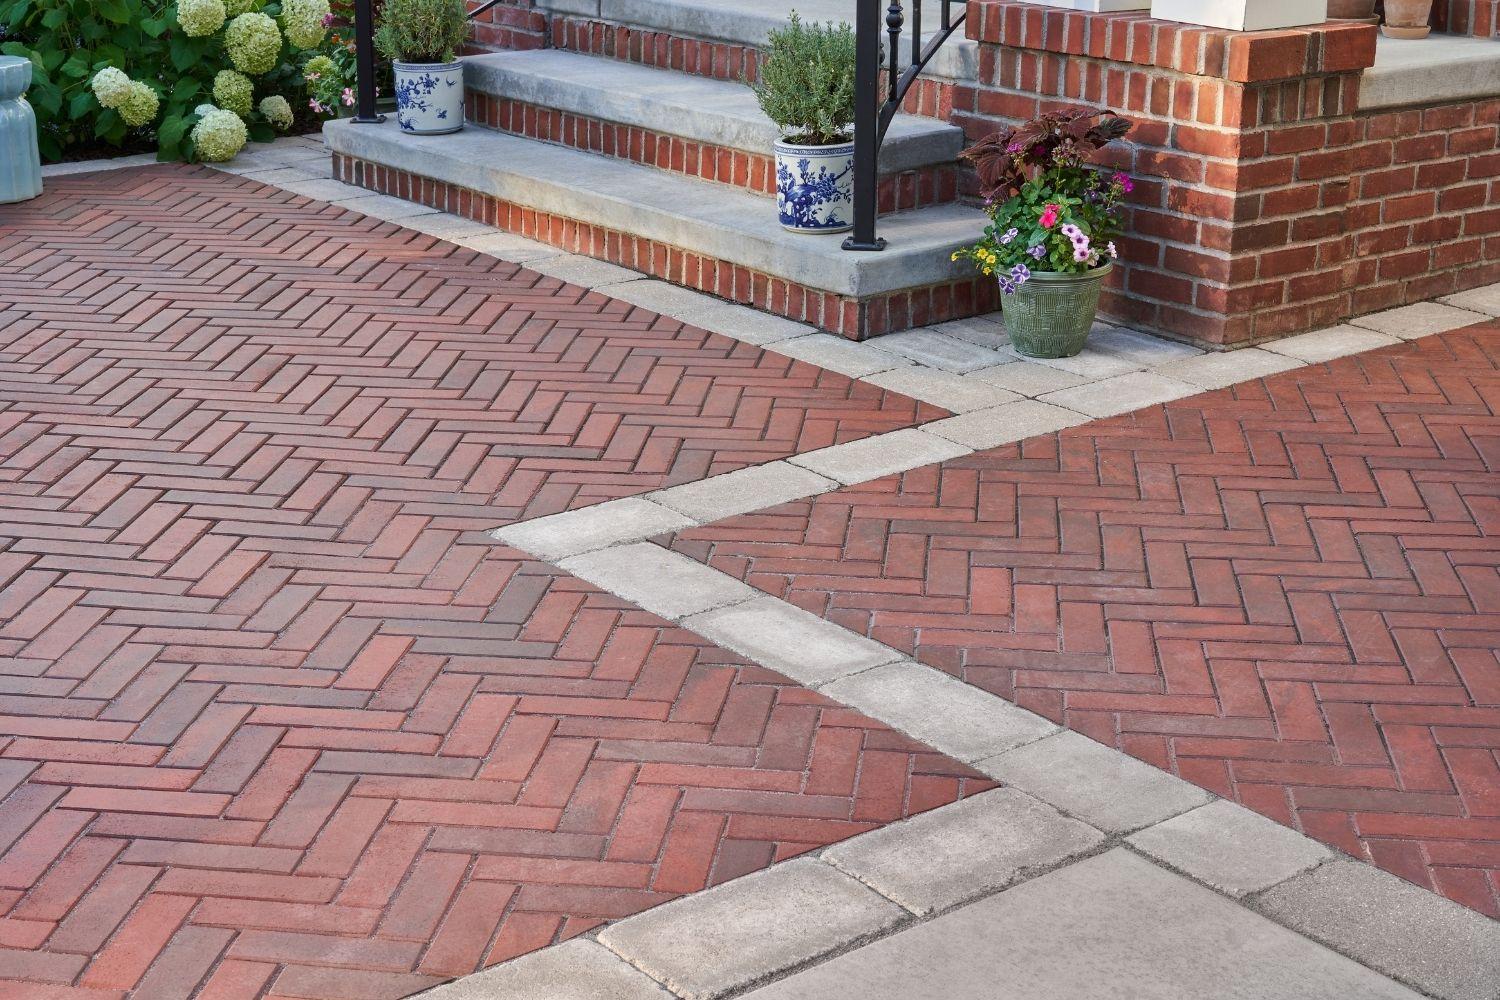 Brick front steps with clay paver patio in herringbone pattern concrete paver border. 